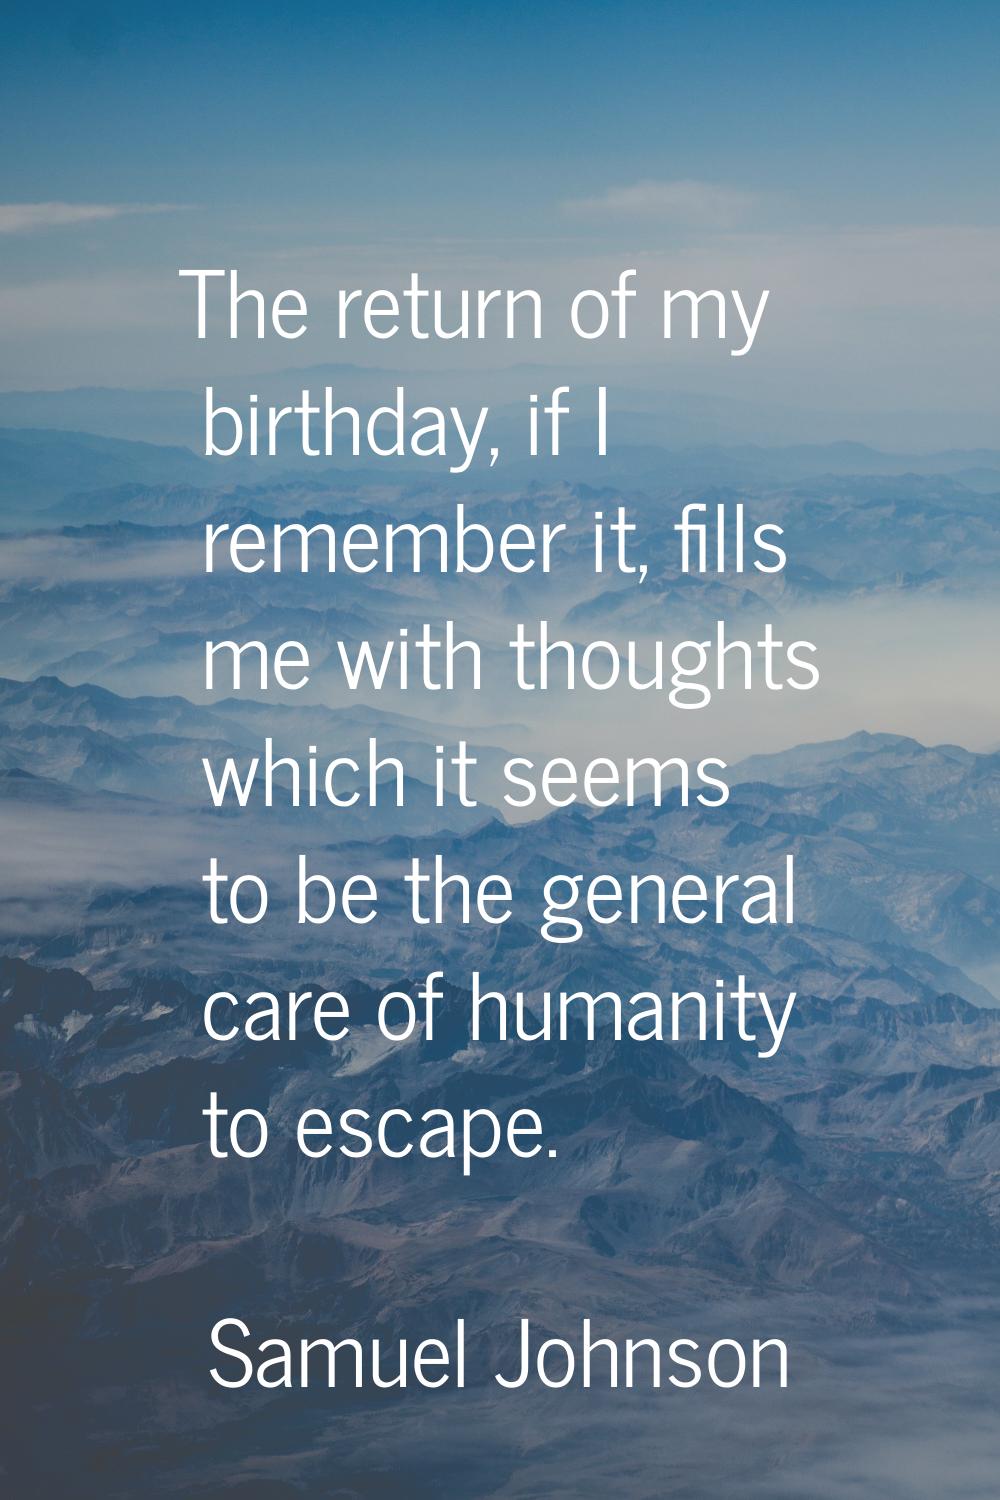 The return of my birthday, if I remember it, fills me with thoughts which it seems to be the genera